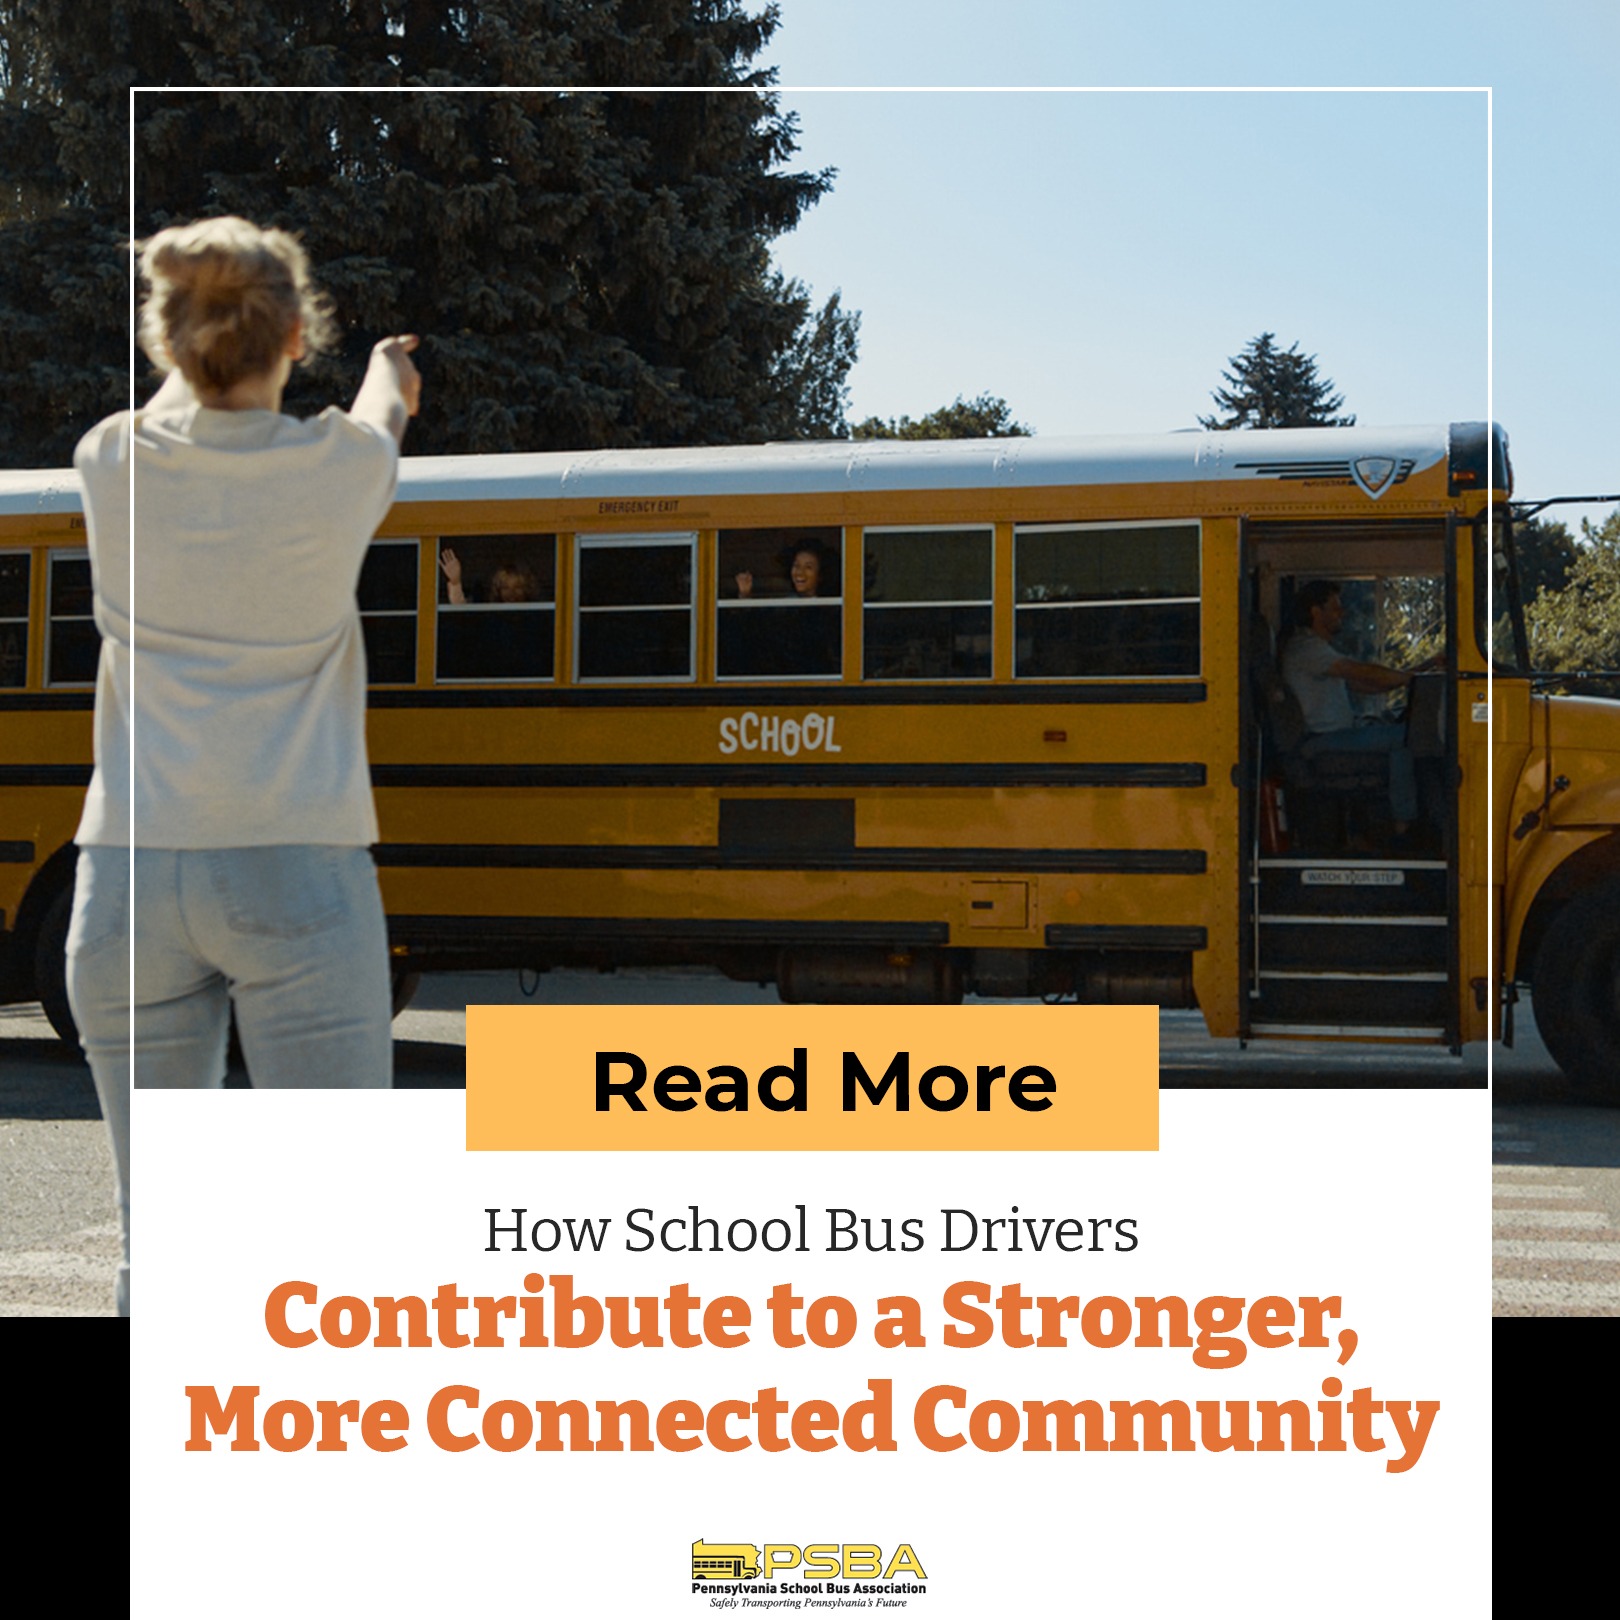 How School Bus Drivers Contribute to a Stronger, More Connected Community